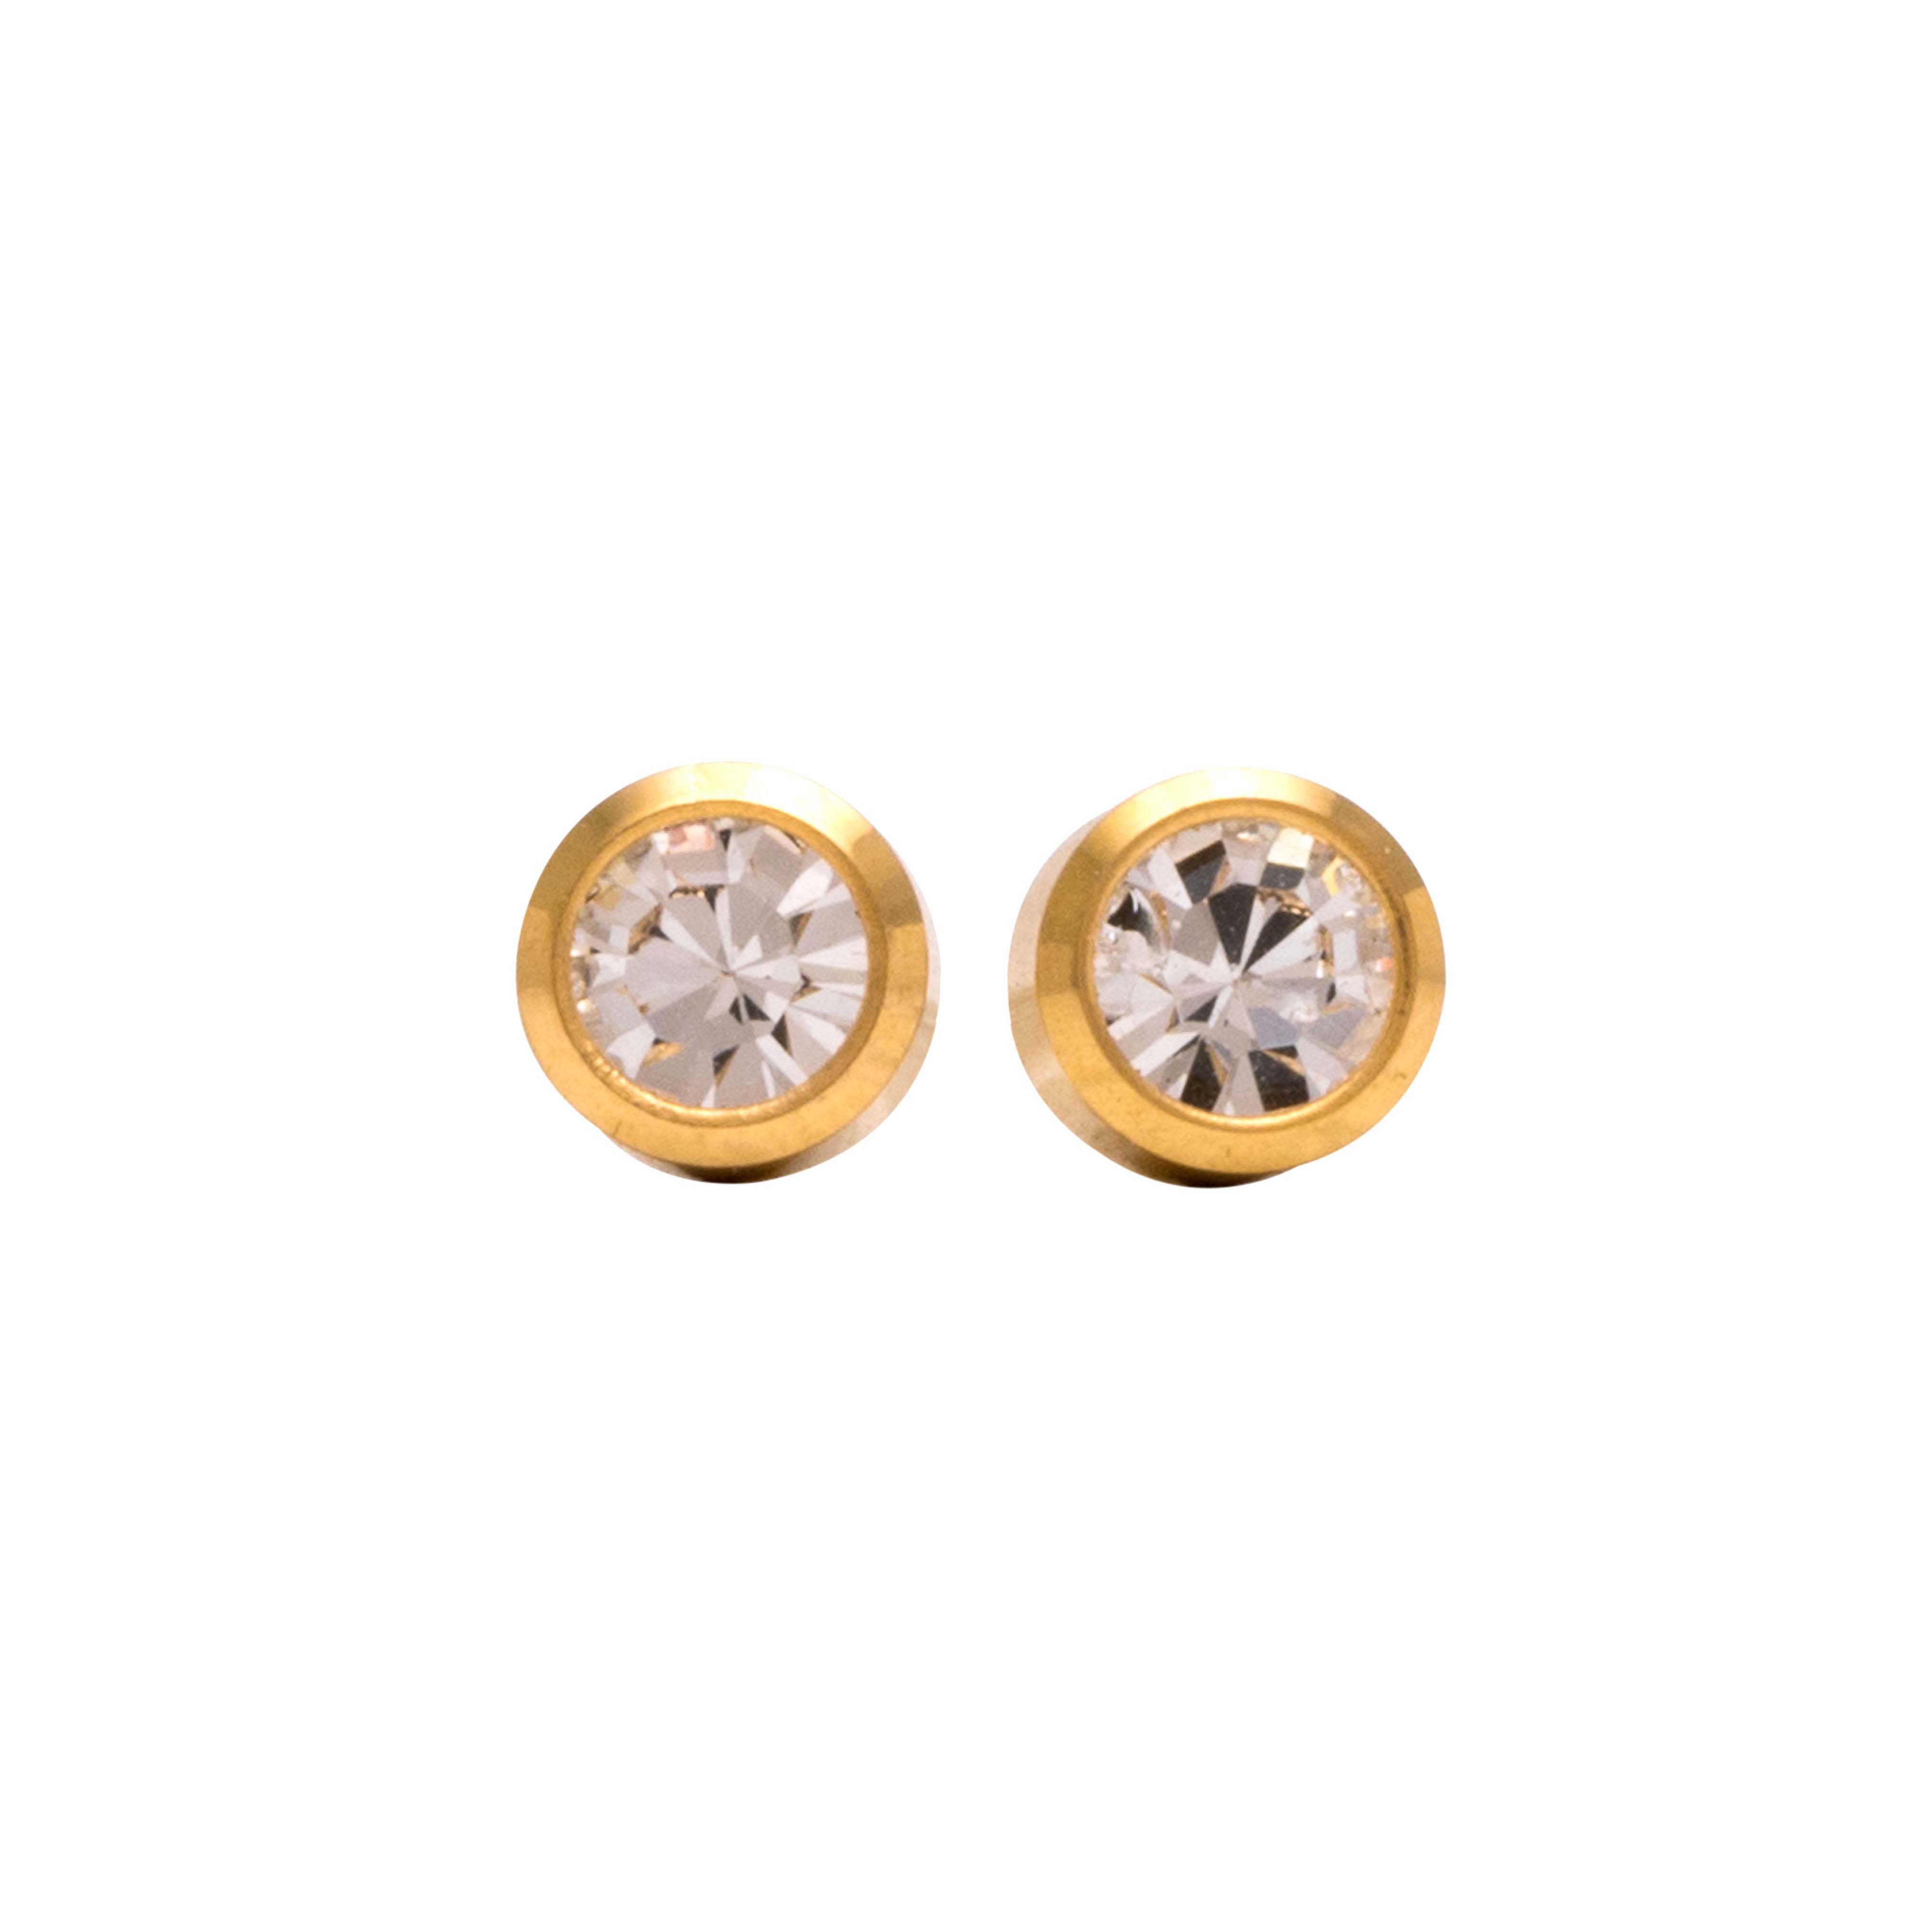 3MM - Bezel - Cubic Zirconia - Crystal Clear | 24K Pure Gold-Plated Piercing Earrings with Ear Piercing Cartridge | Studex System75